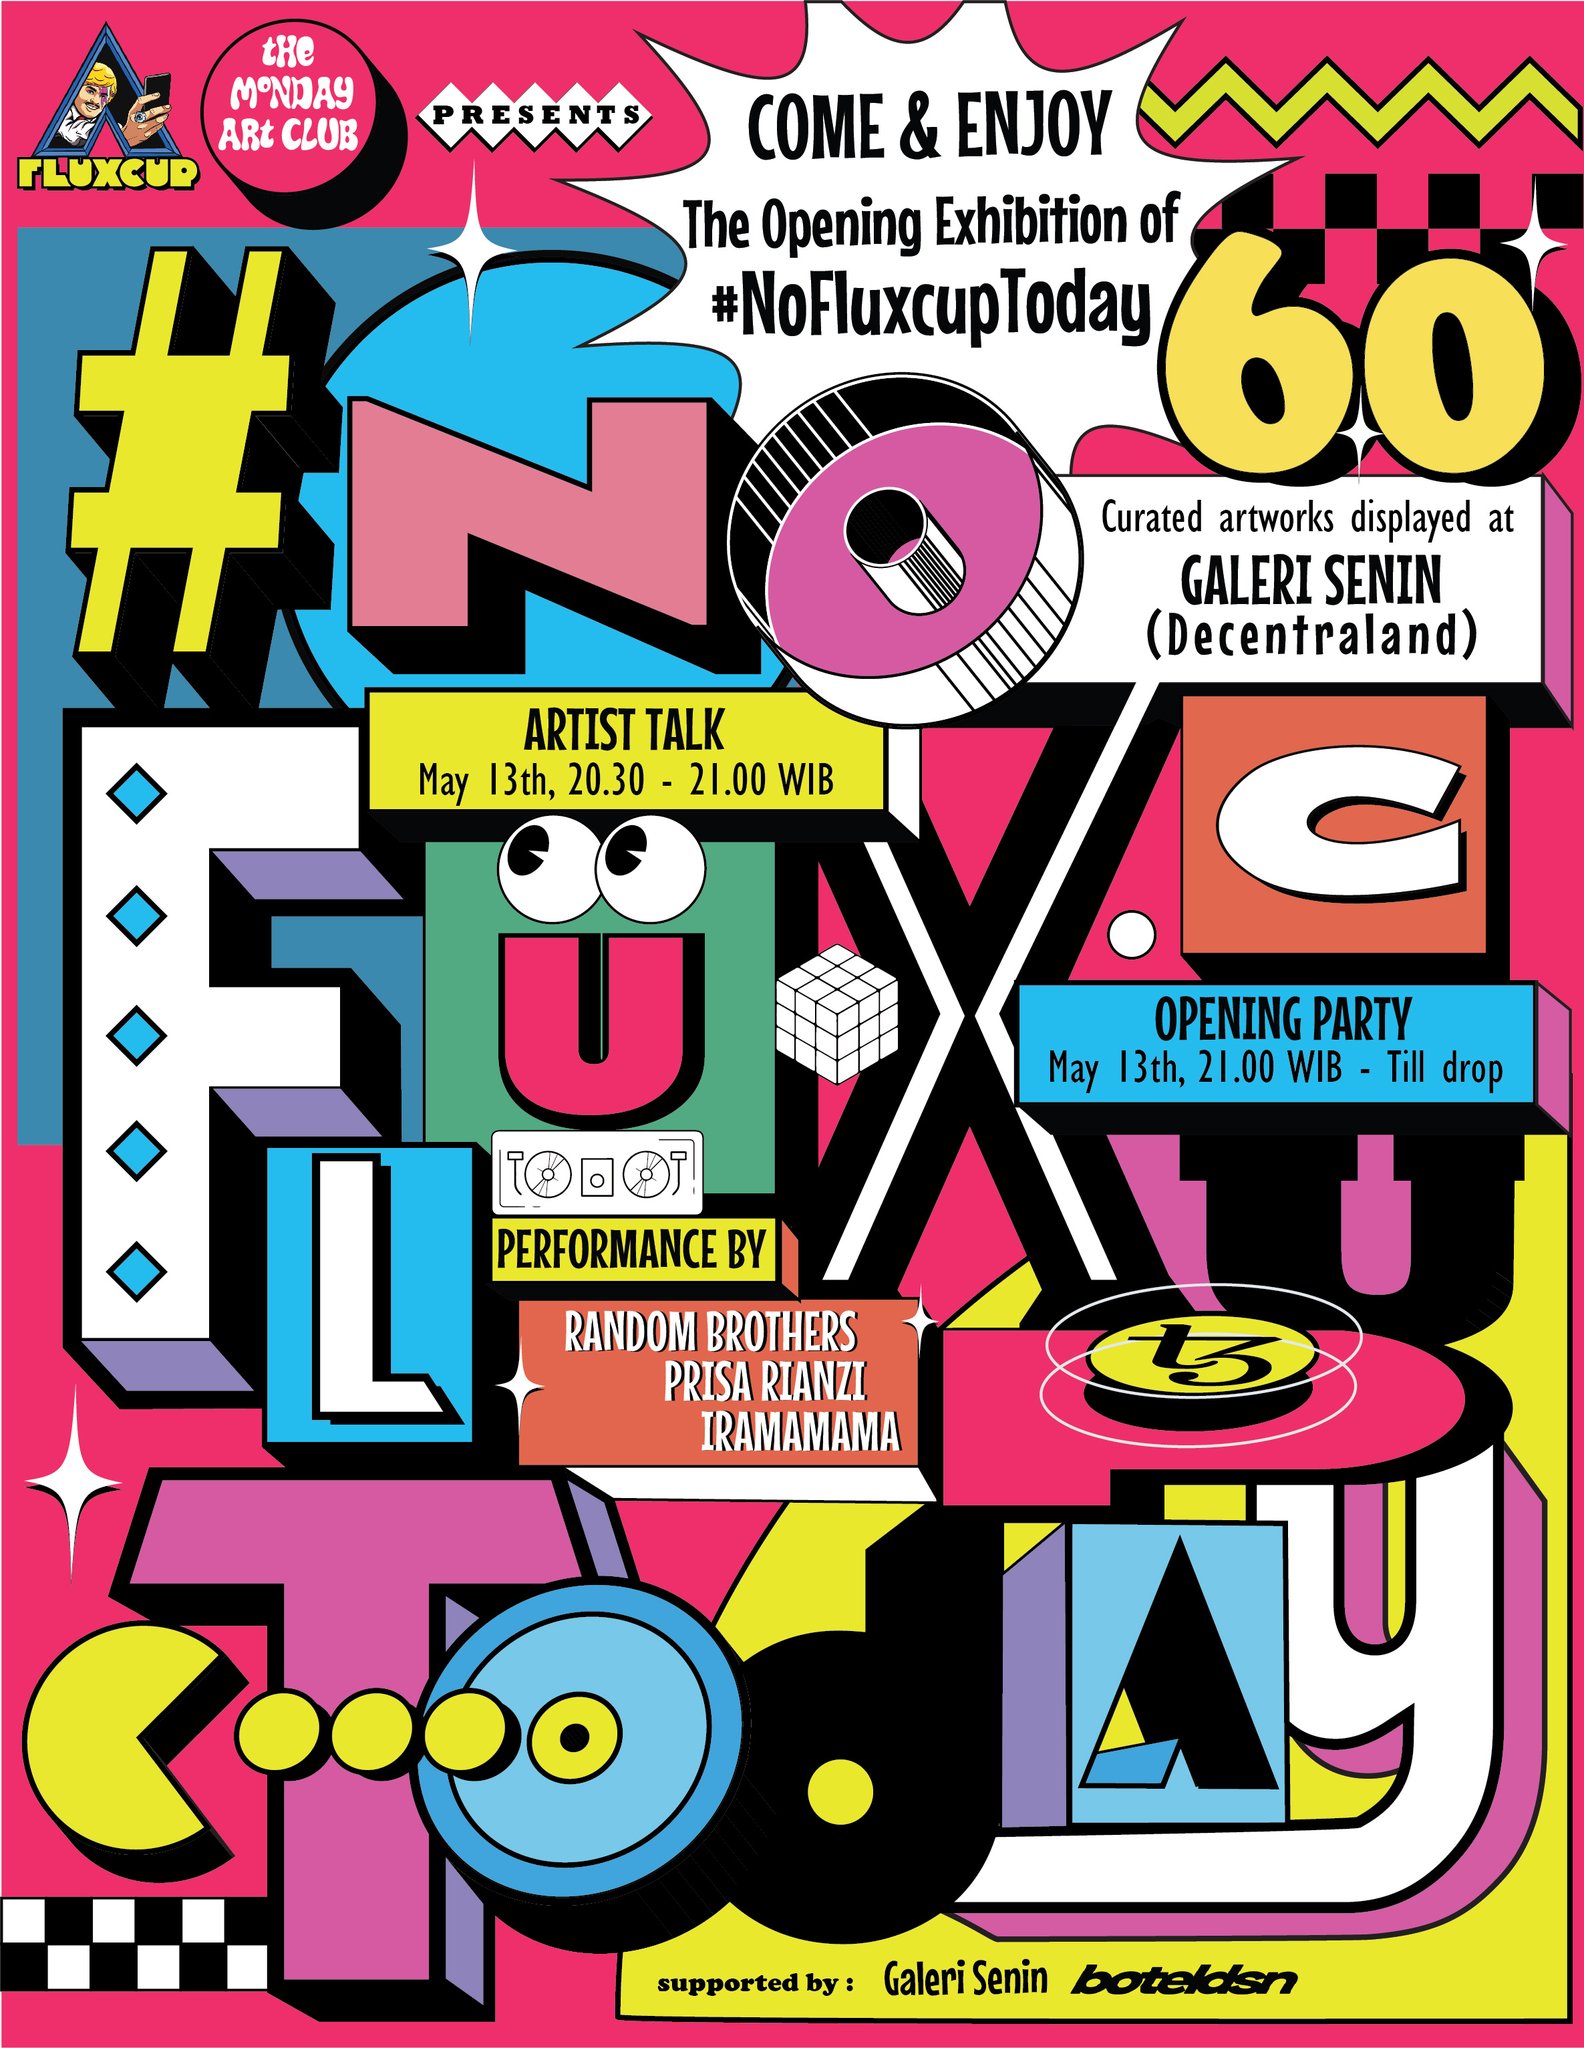 RT fluxcup: TONIGHT!  The opening of #NoFluxcupToday Exhibition. Displaying  60 curated artists and a special graffiti bomb from @Stereoflow With a special performance from @randombrotherss @sheterror and @drawmama iramamama. Join the madness tonight at 21.00 WIB at @Decentraland  Link ⬇️ [twitter.com] [pbs.twimg.com] [pbs.twimg.com] [pbs.twimg.com]